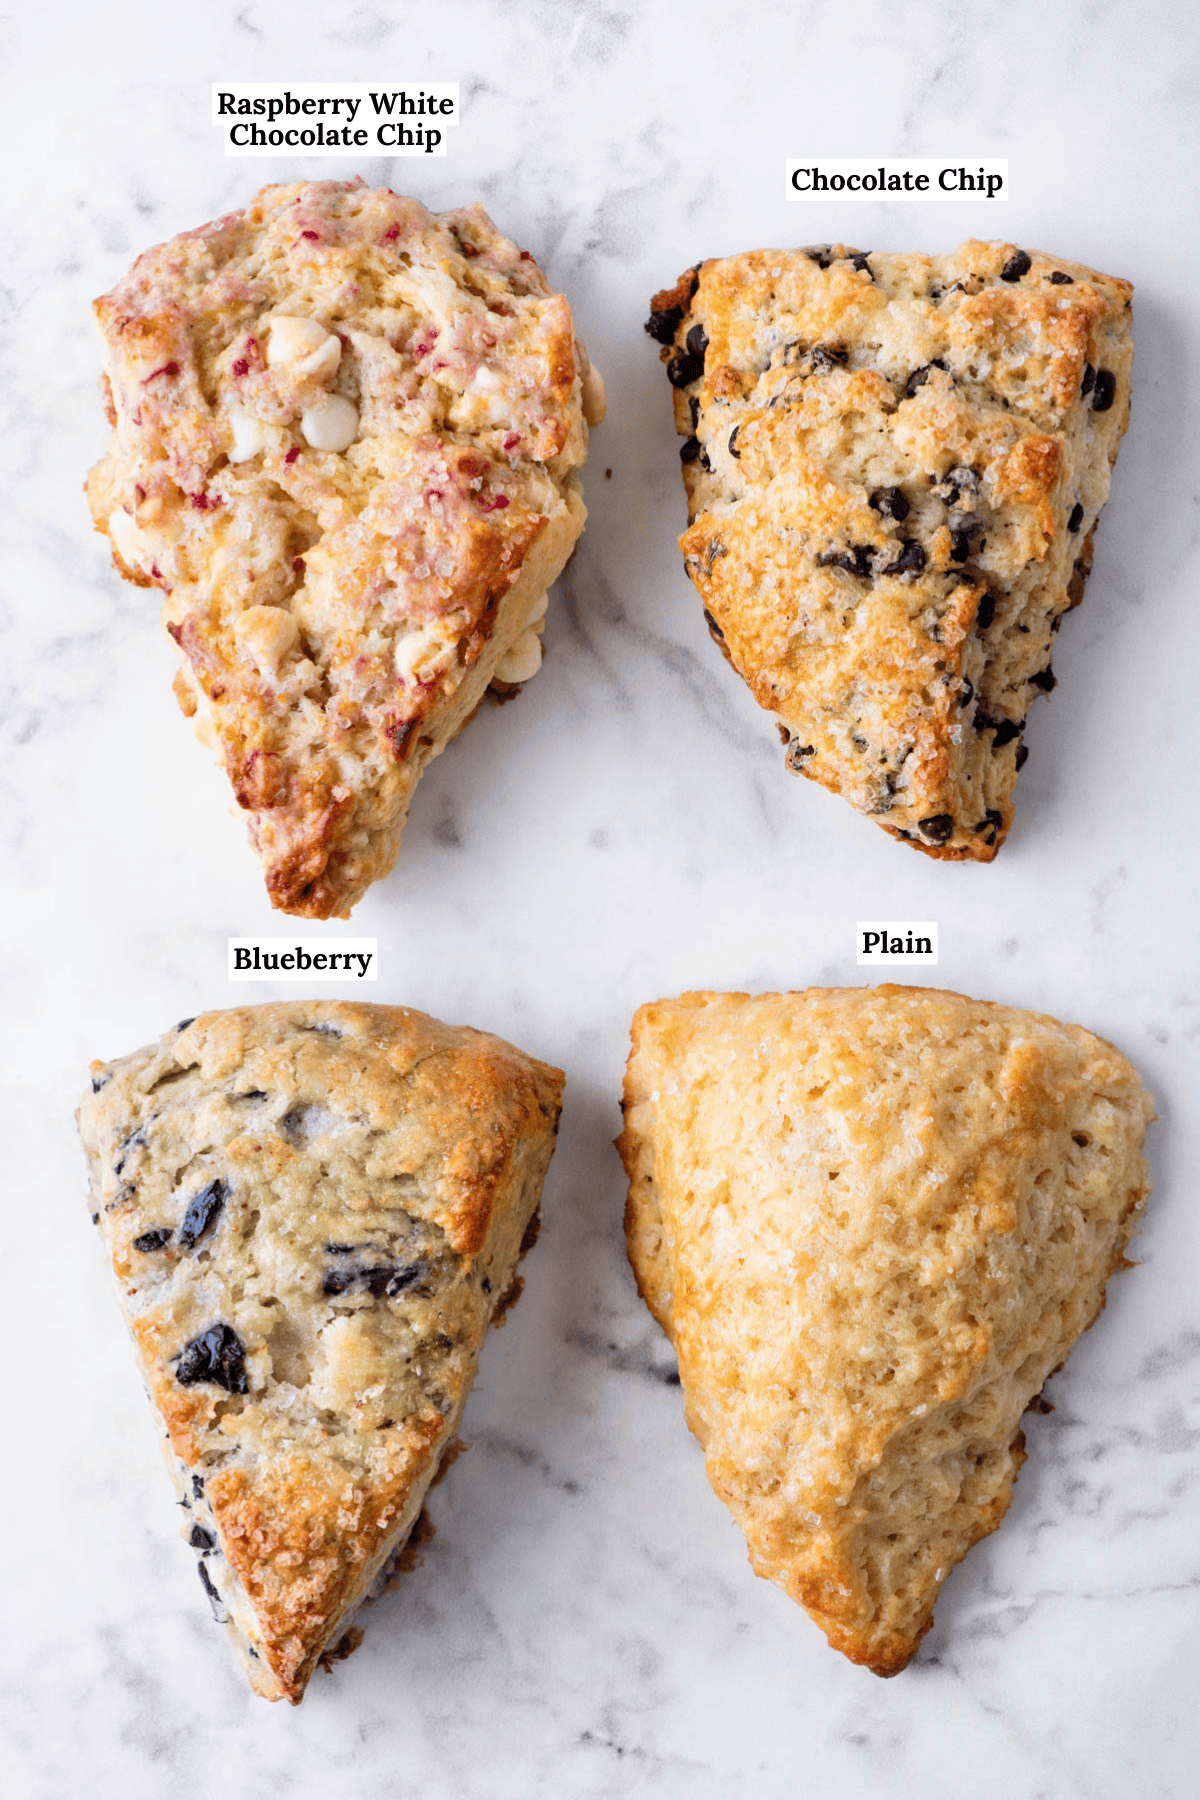 a labeled photo showing four flavors of scones: raspberry white chocolate chip, chocolate chip, blueberry, and plain